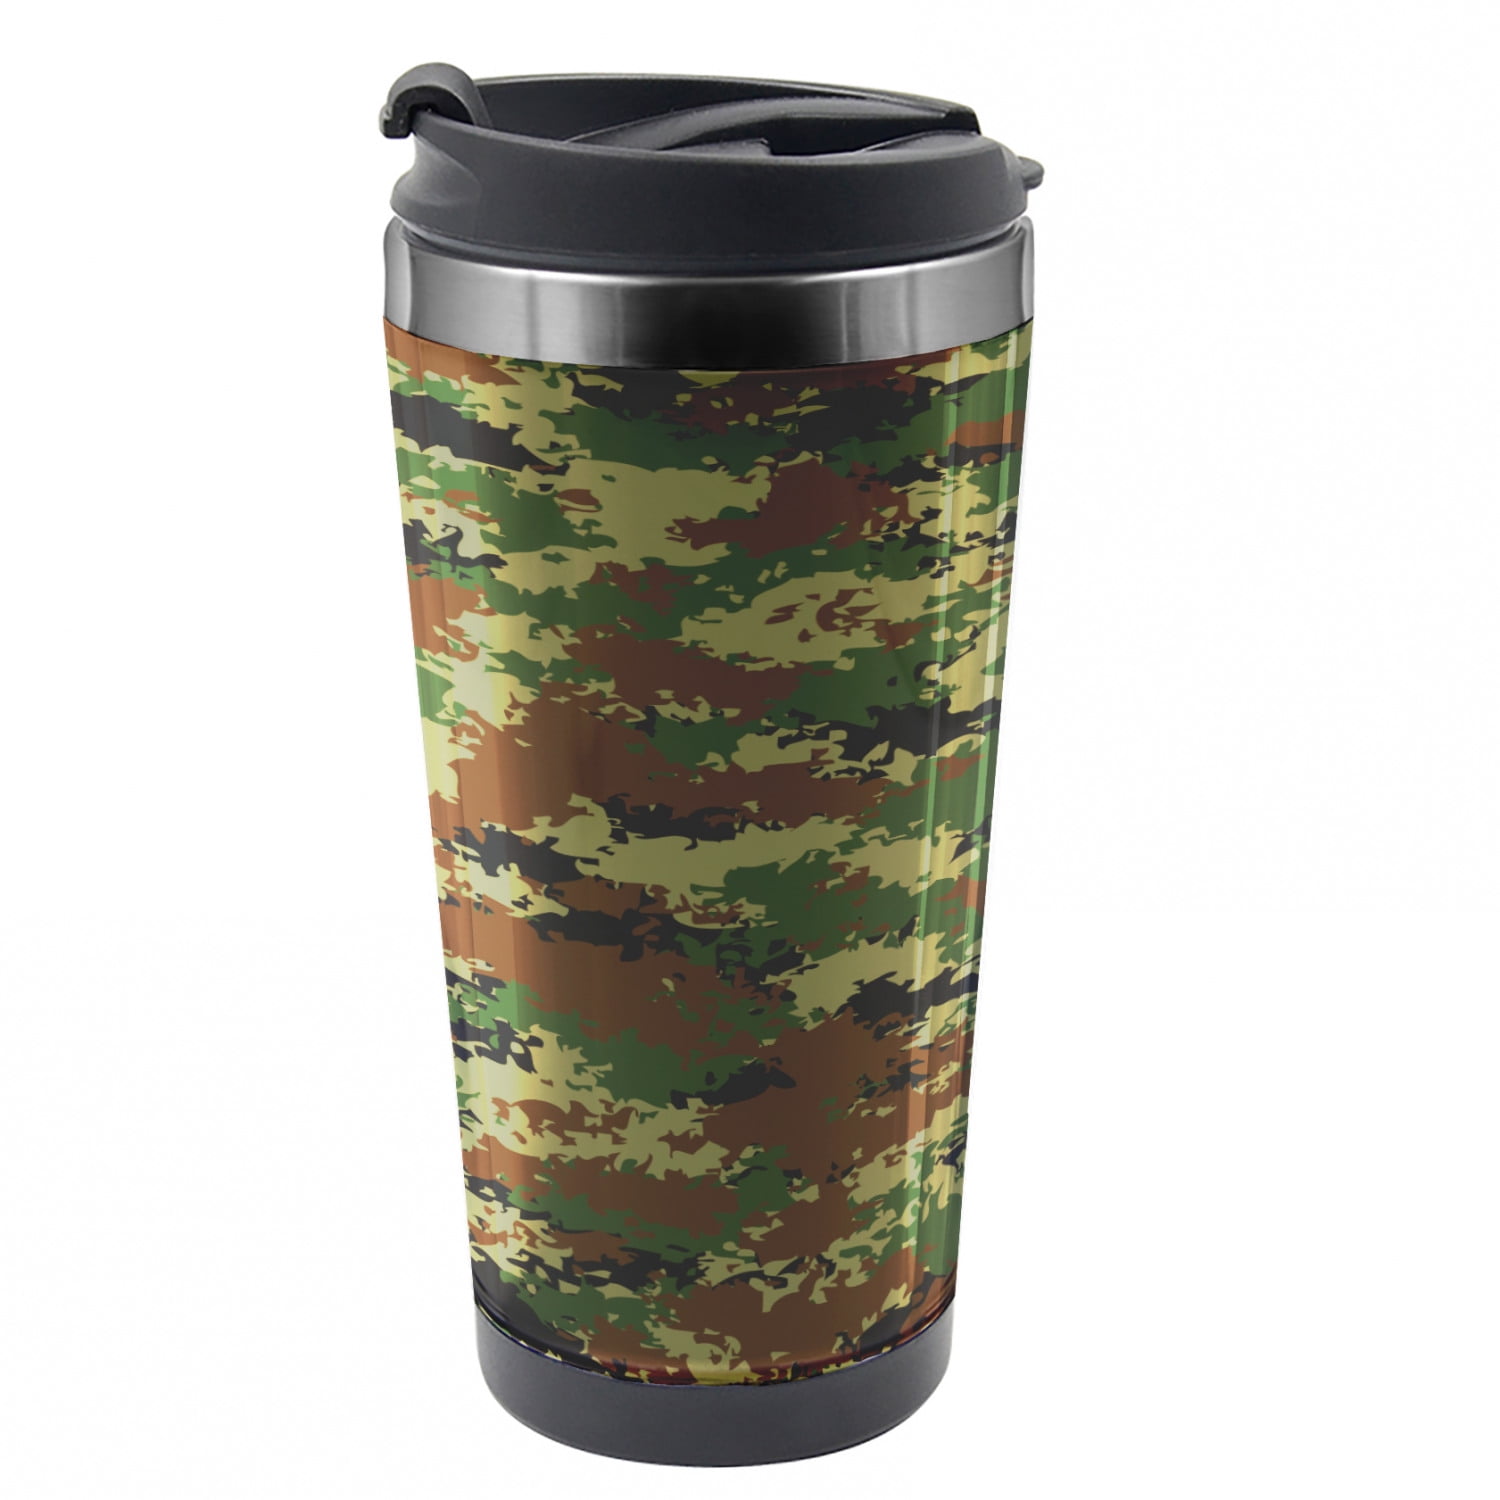 Camo Travel Mug, Hiding in Desert Camo, Steel Thermal Cup, 16 oz, by  Ambesonne